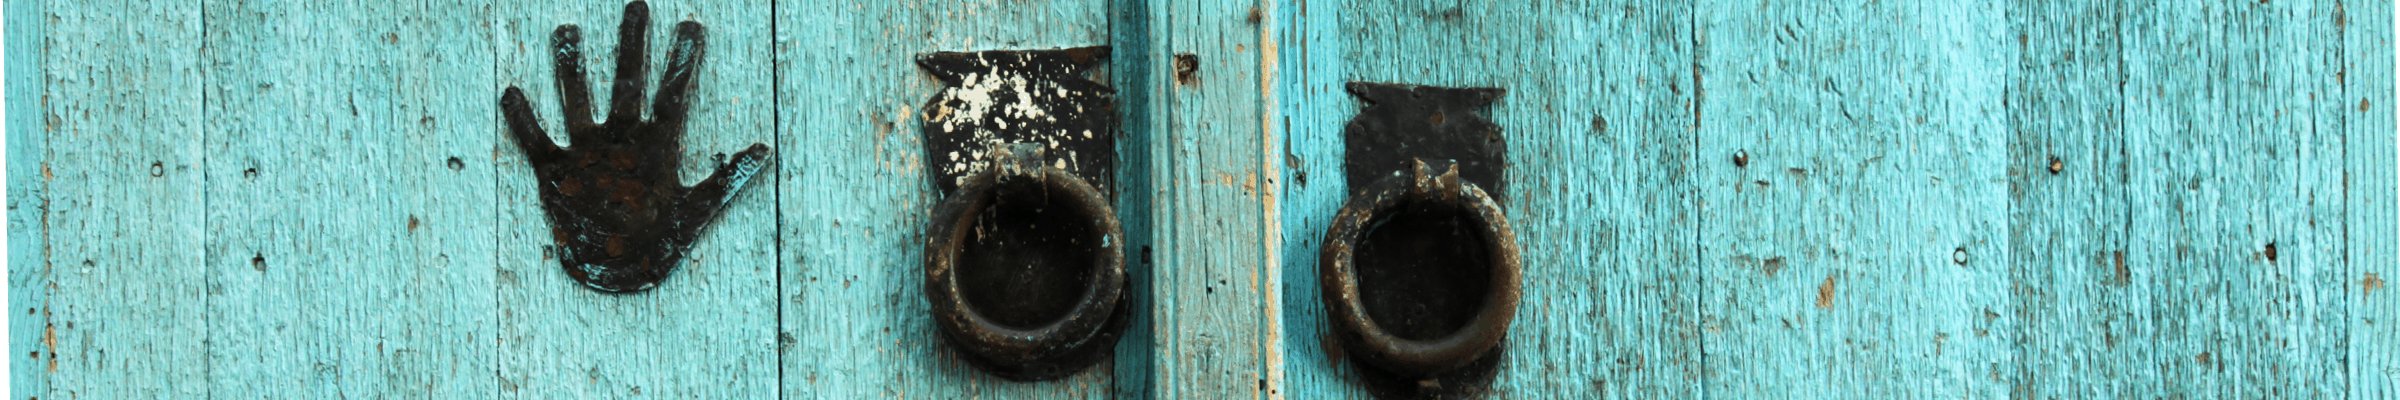 Turquoise painted wooden door with two iron door handles and an small outline of an iron hand placed on the left side. 